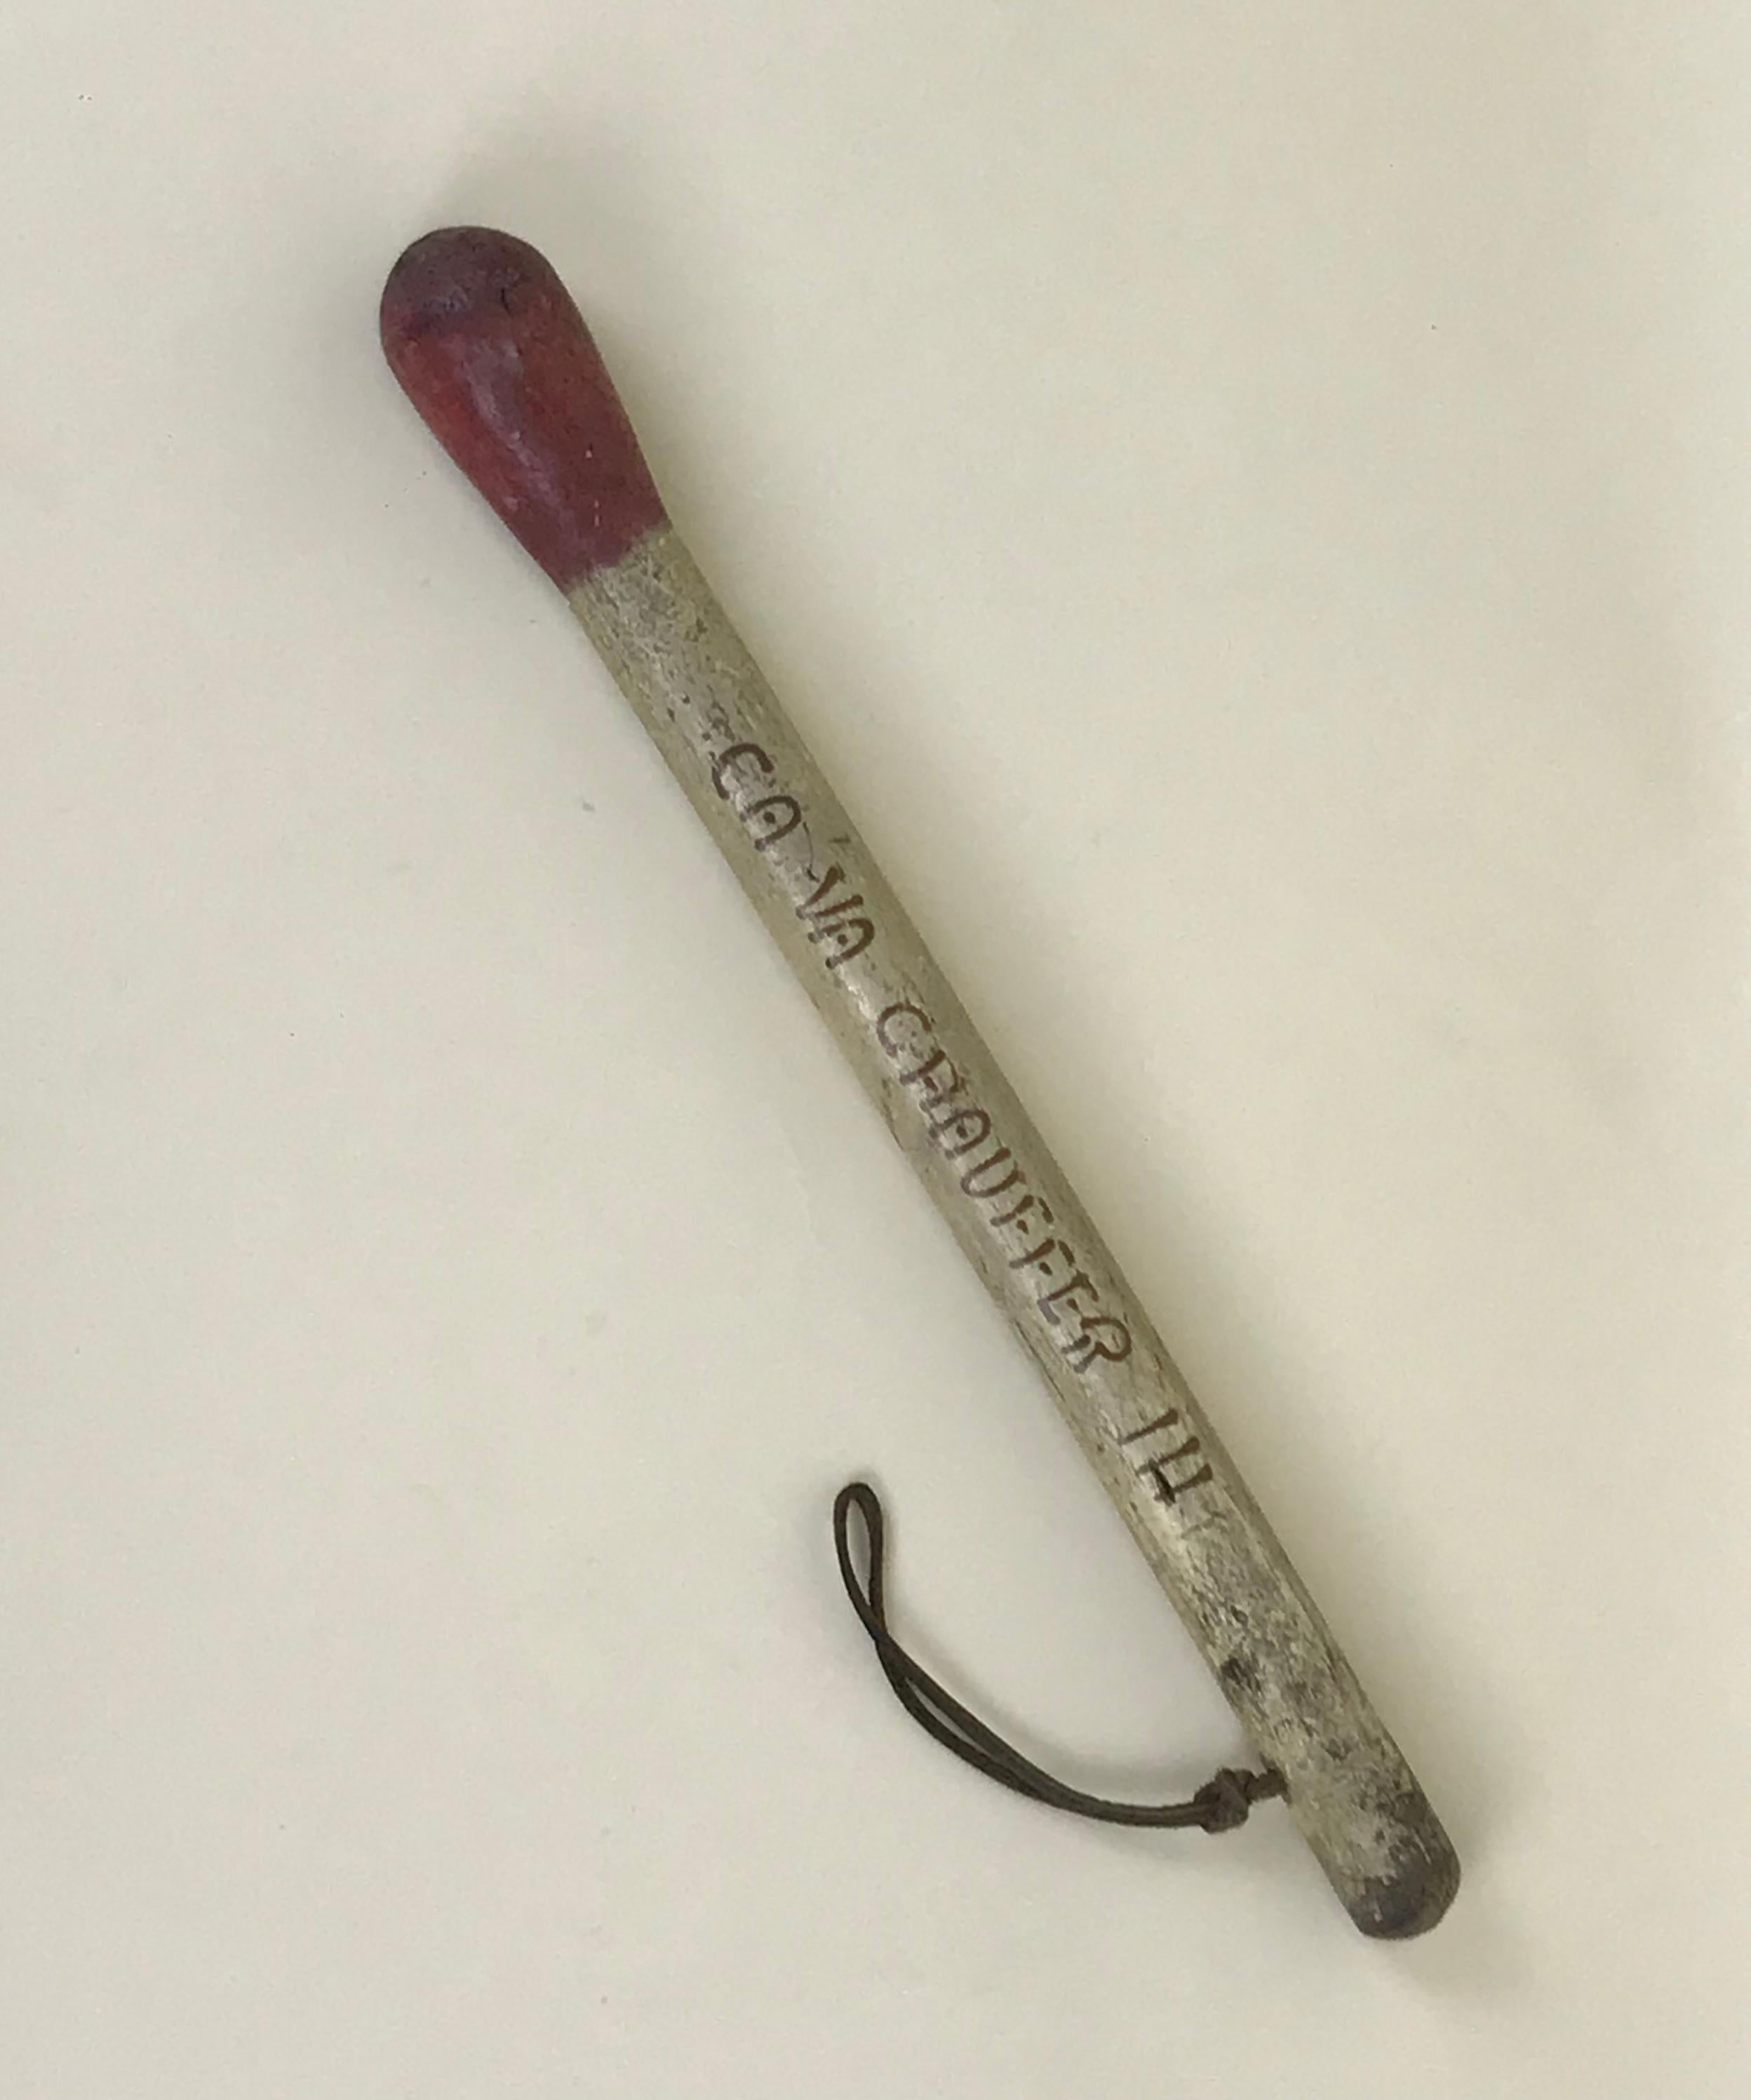 1890s French Wooden Stick Shaped like a Matchstick with Motto, Ça Va Chauffer 5